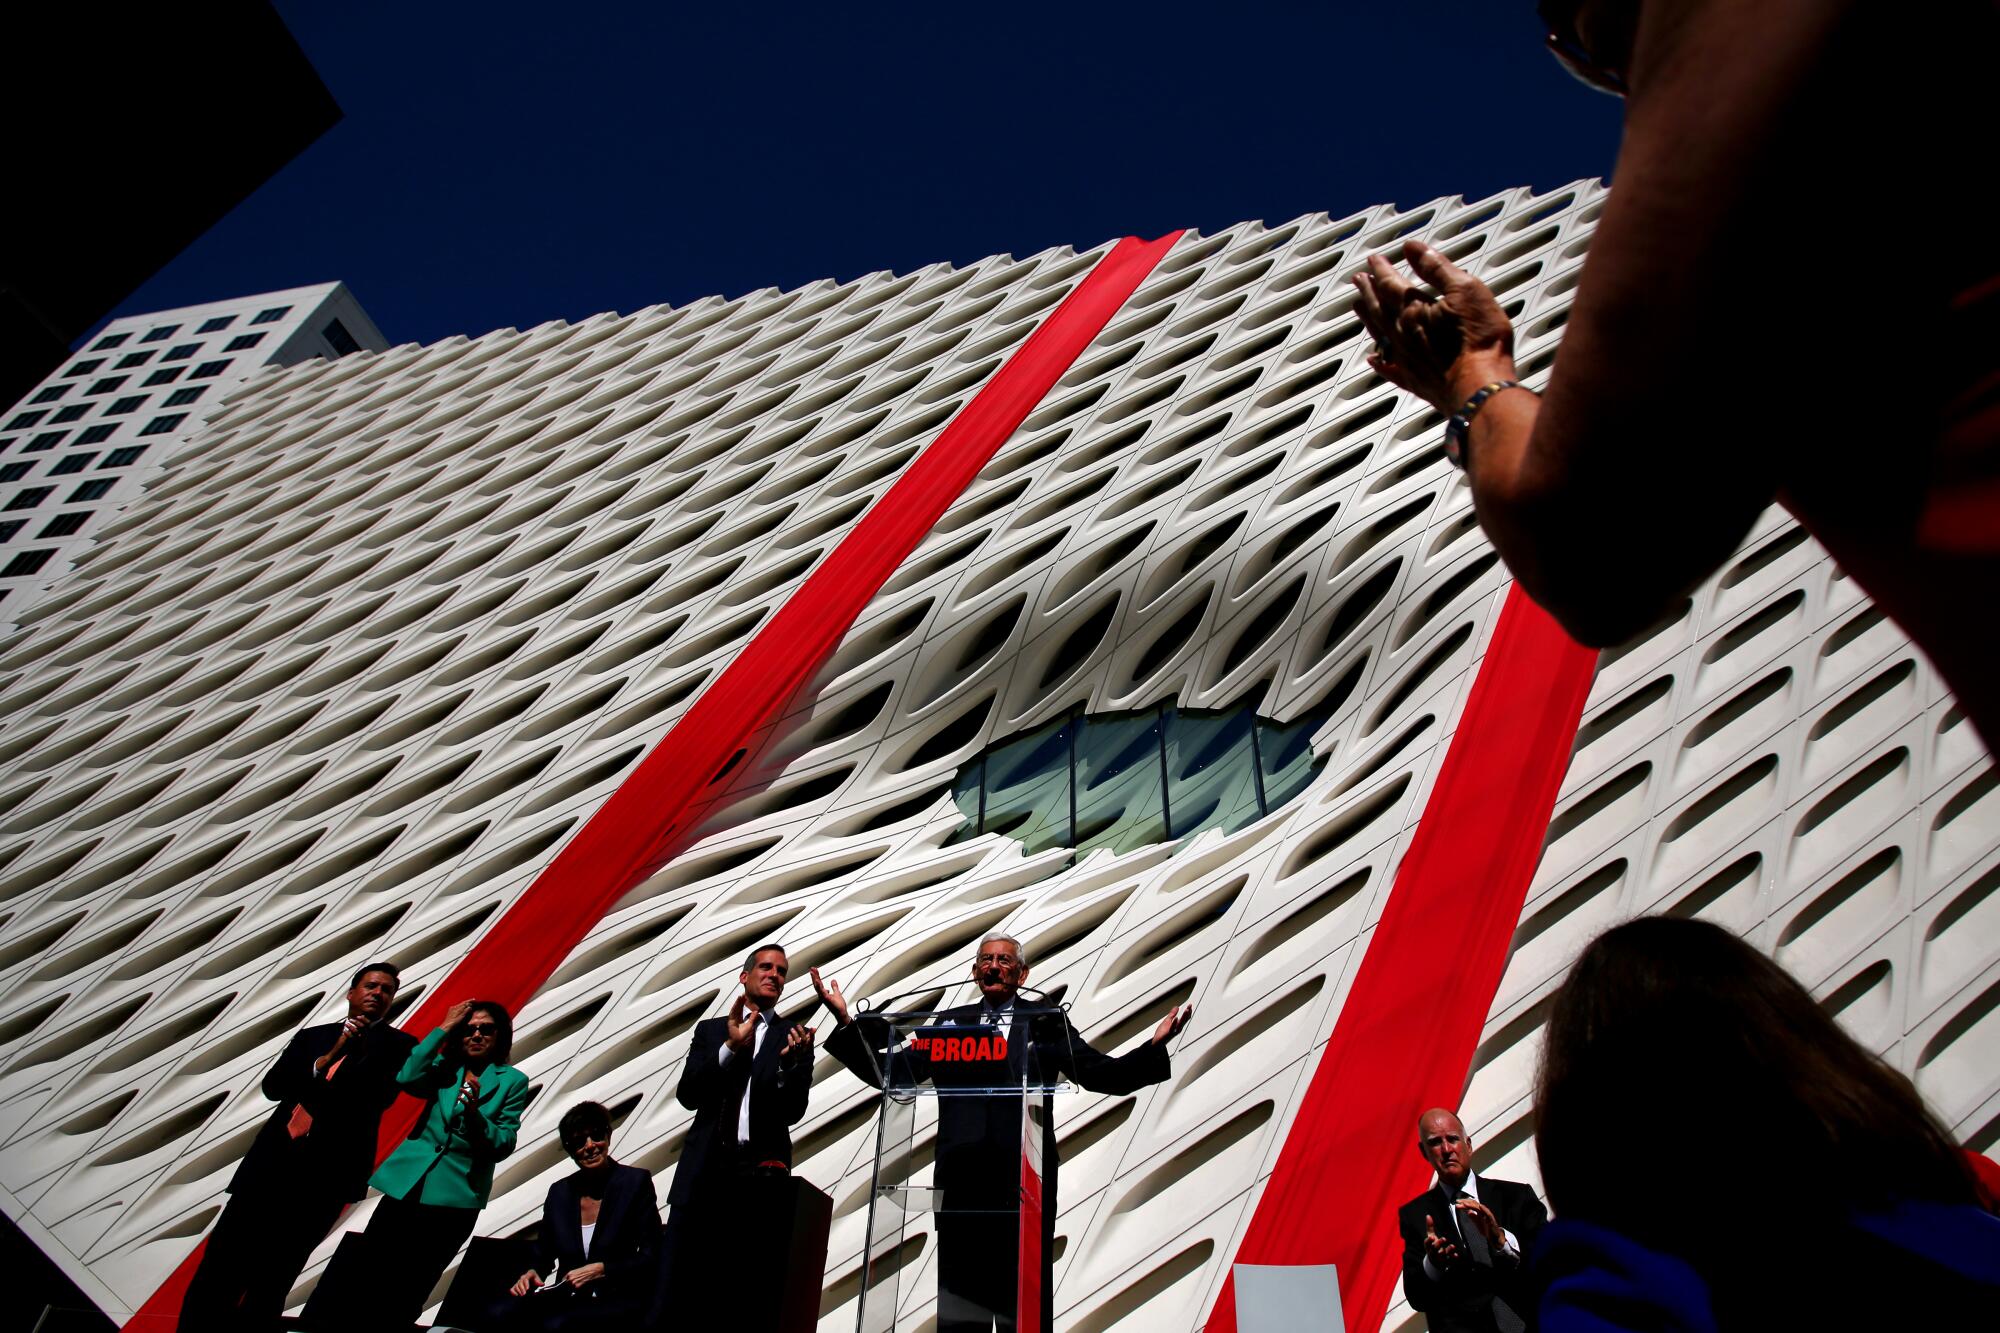 Eli Broad speaks at a podium in front of a honeycomb-like building facade with two vertical red strips. 